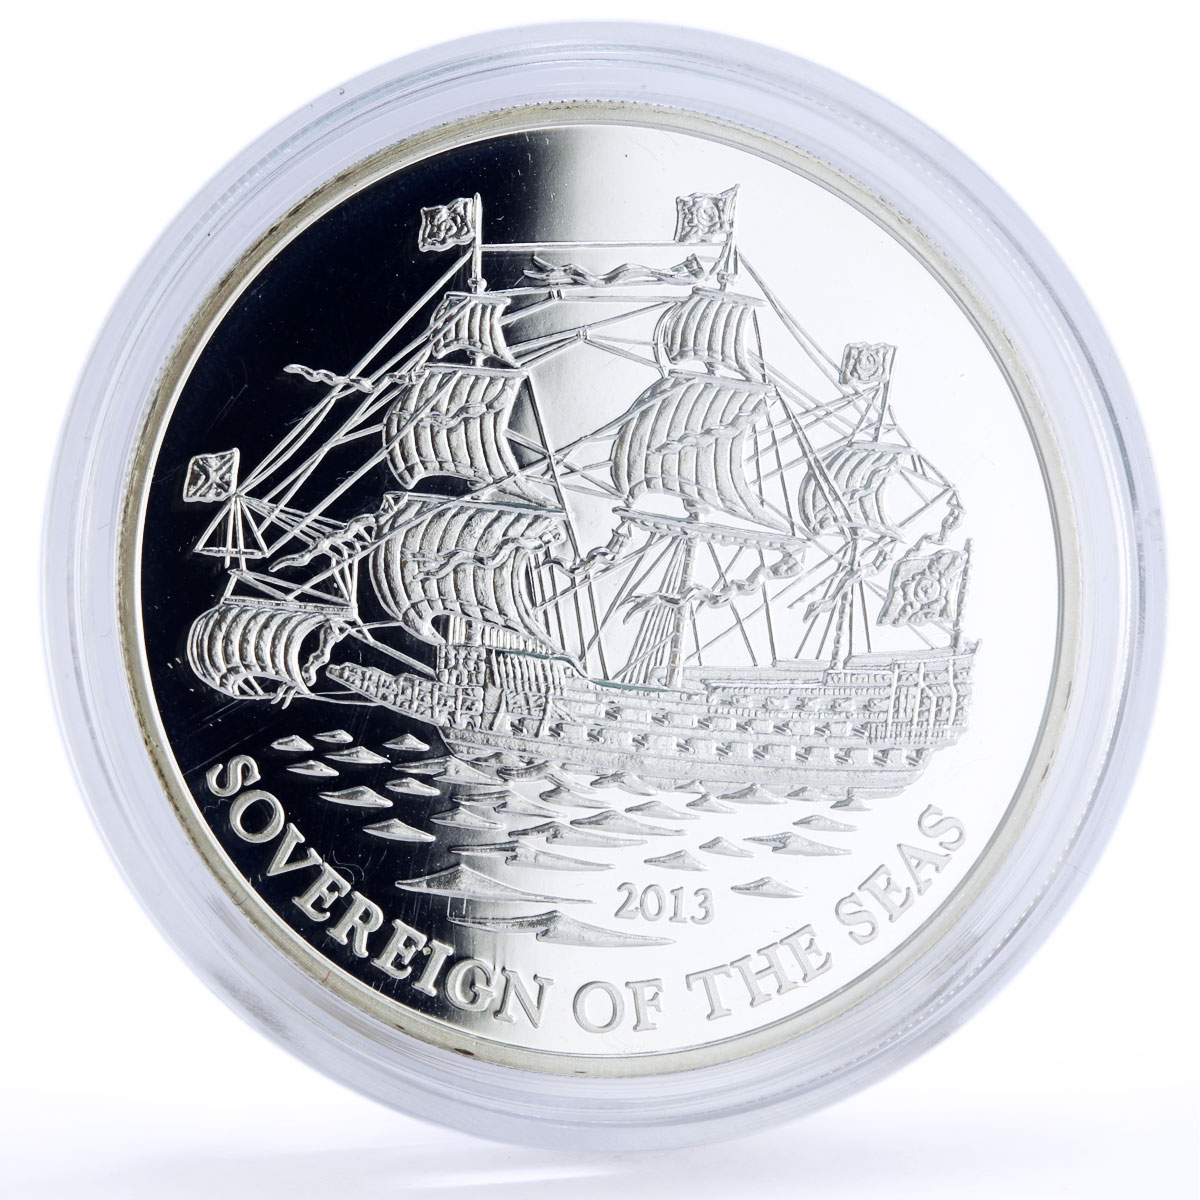 Ivory Coast 1000 francs Seafaring Sovereign of the Sea Ship silver coin 2013